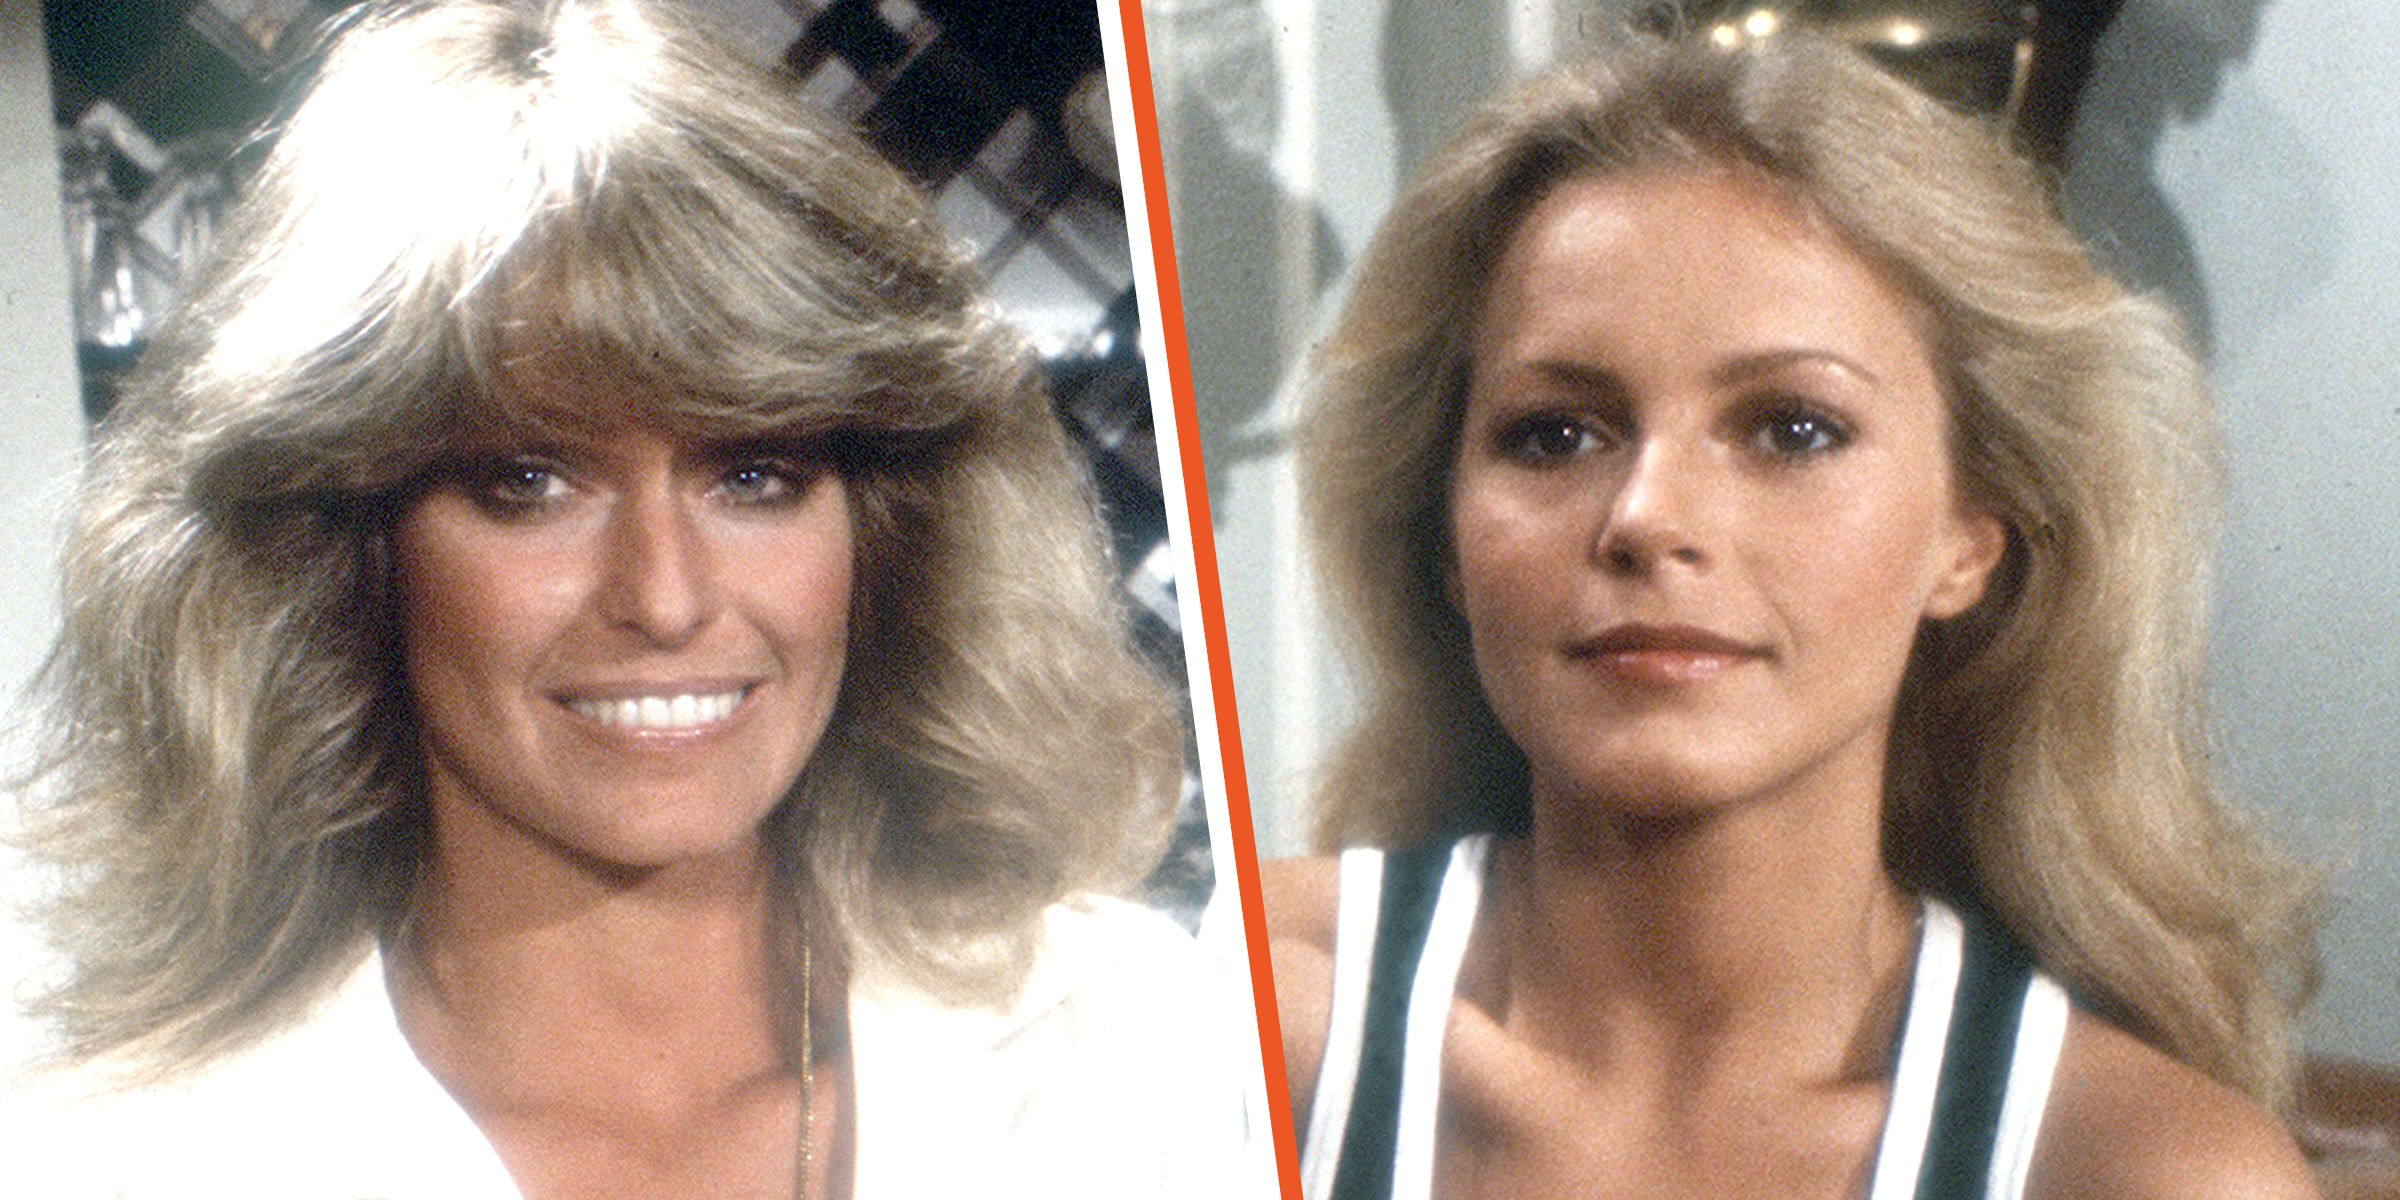 Farrah Fawcett and Cheryl Ladd | Source: Getty Images